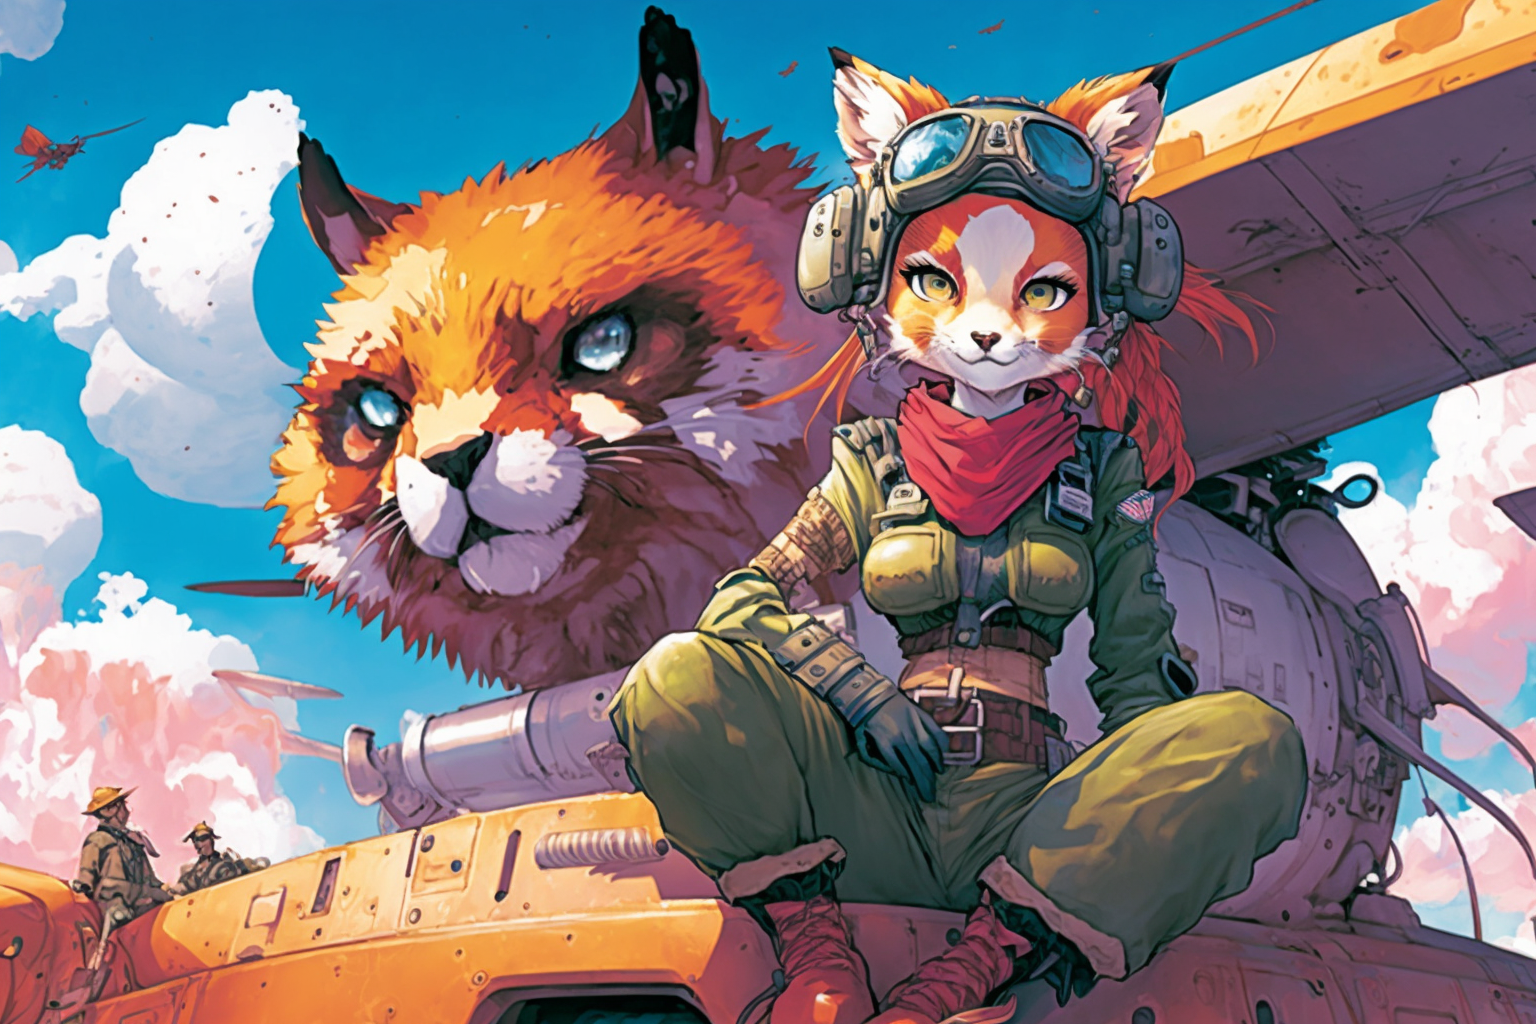 MrNoMbre_a_cute_and_fluffy_red_panda_with_pilot_outfit_inside_a_3267622d-b5de-475a-99bf-66897f9c418d.png